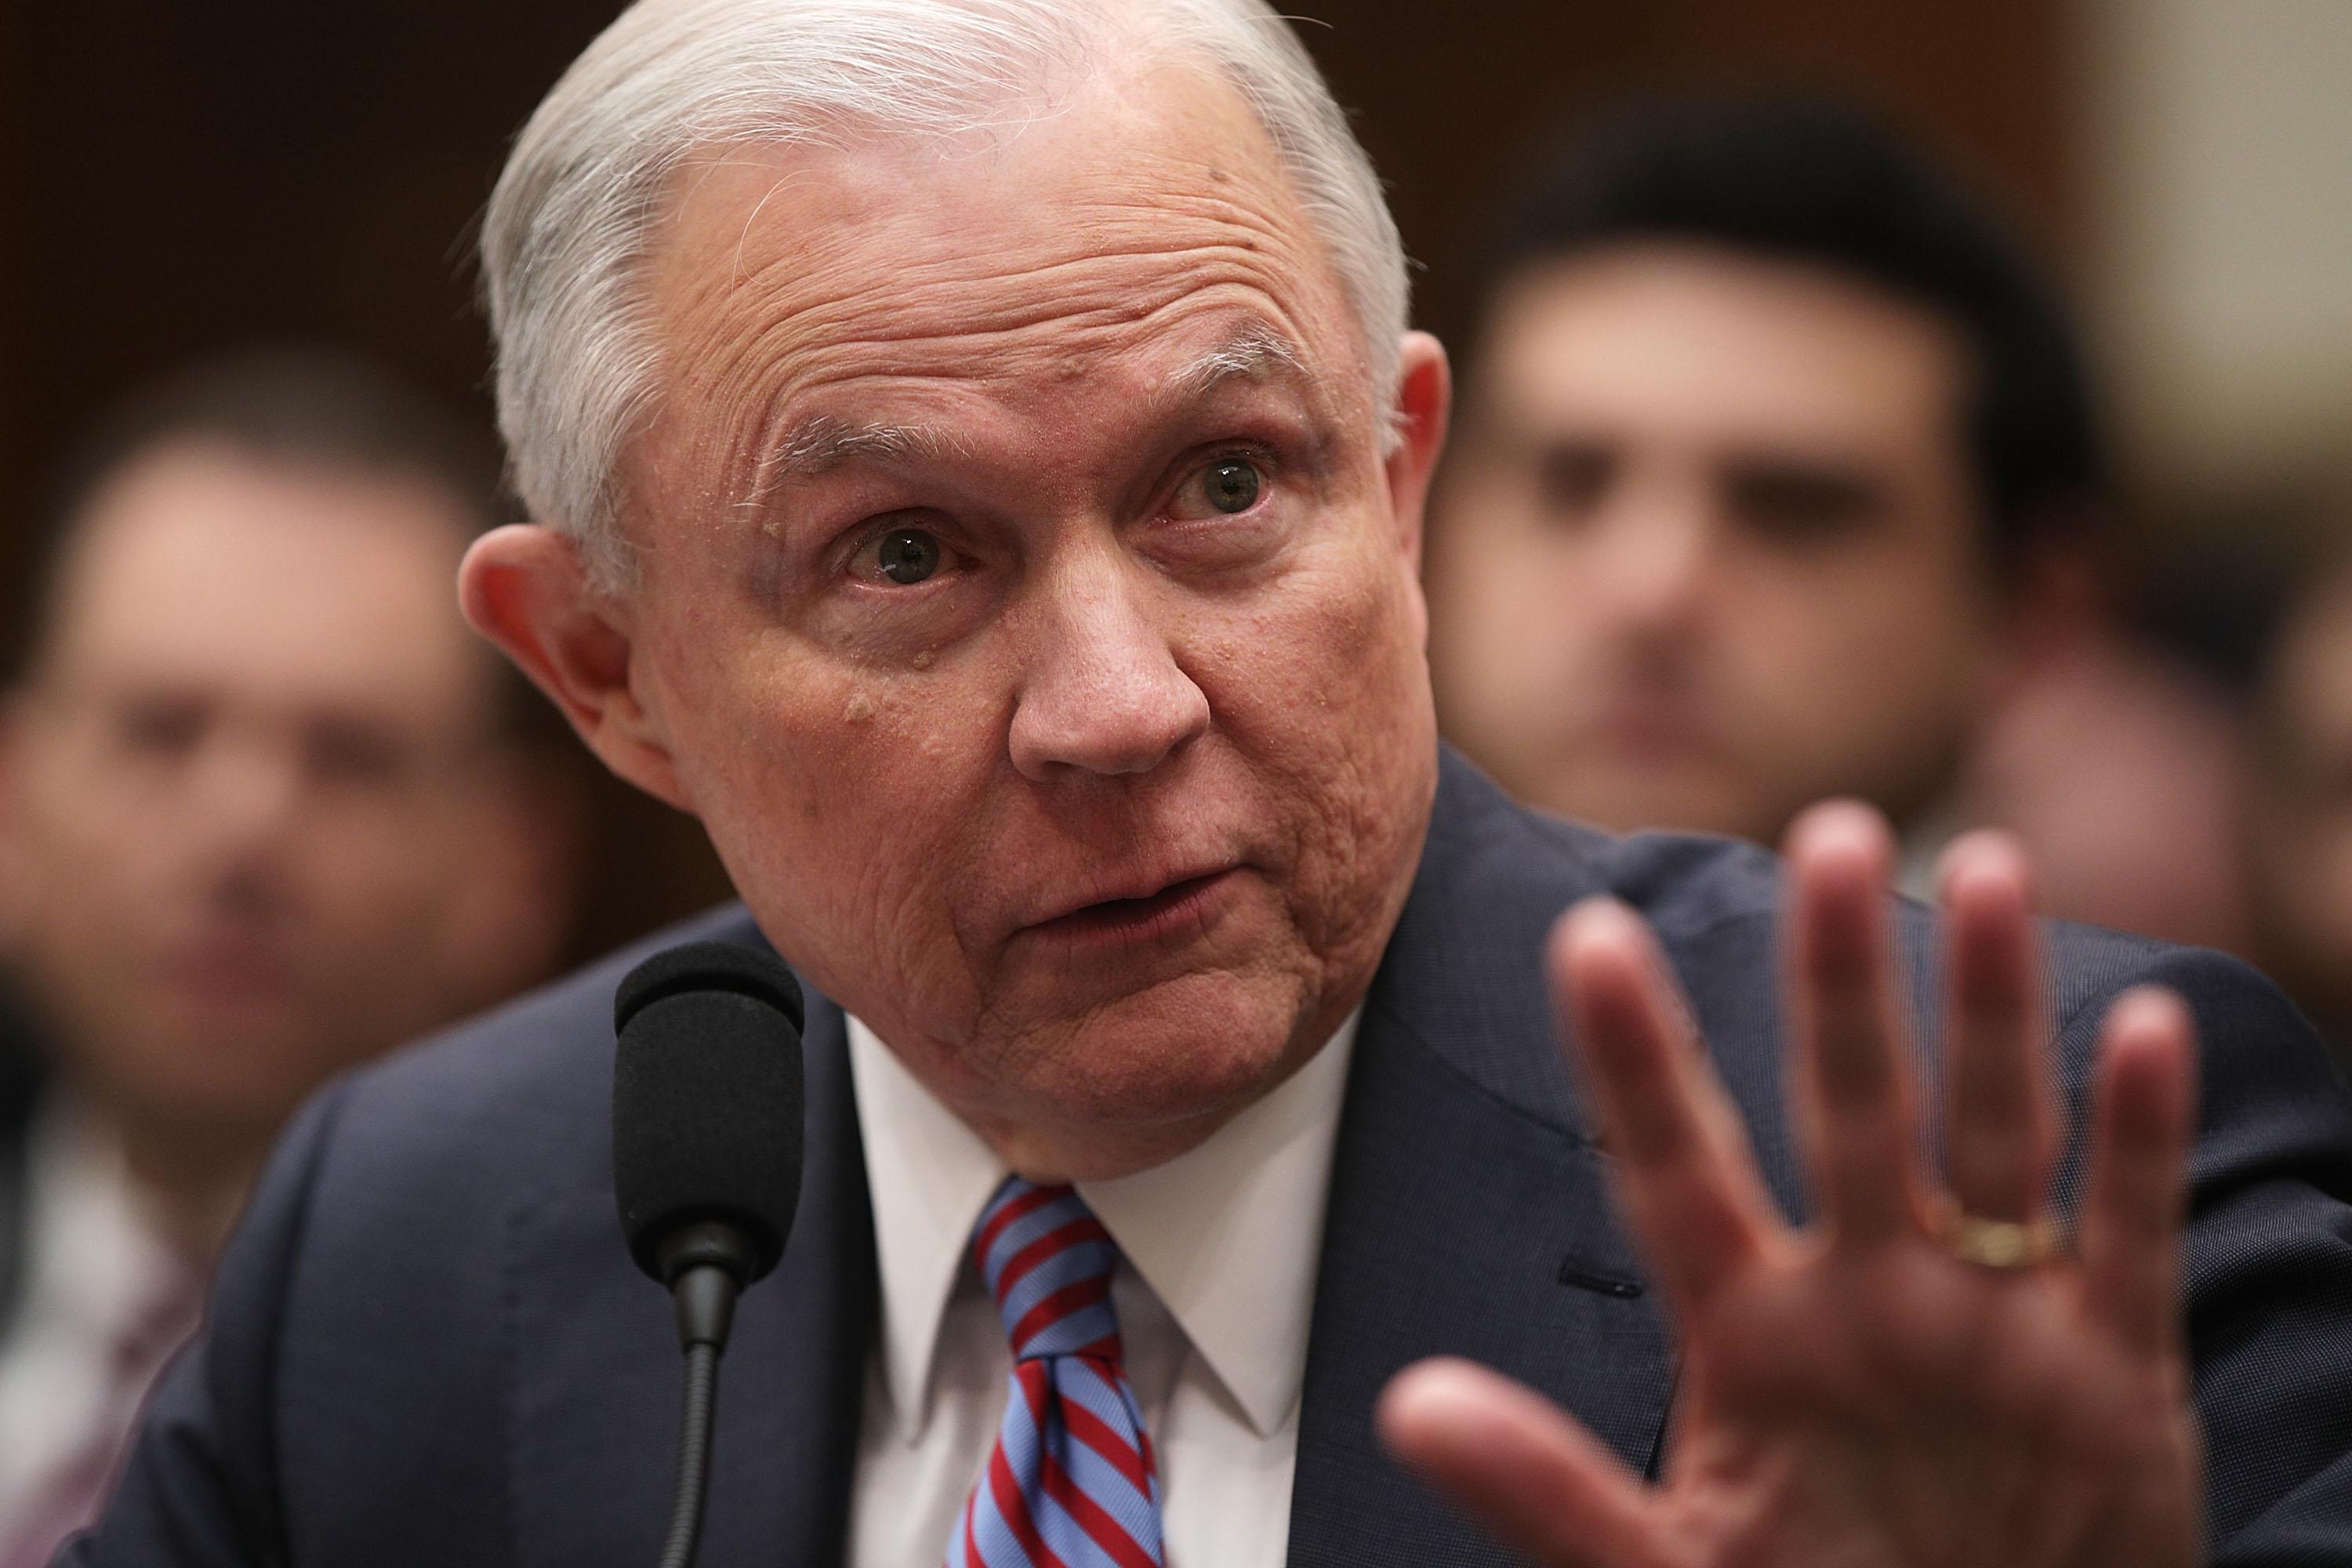 Attorney General Jeff Sessions testifies during a hearing before the House Judiciary Committee November 14, 2017 in Washington, DC. Sessions is expected to face questions from lawmakers again on whether he had contacts with Russians during the presidential campaign last year. 